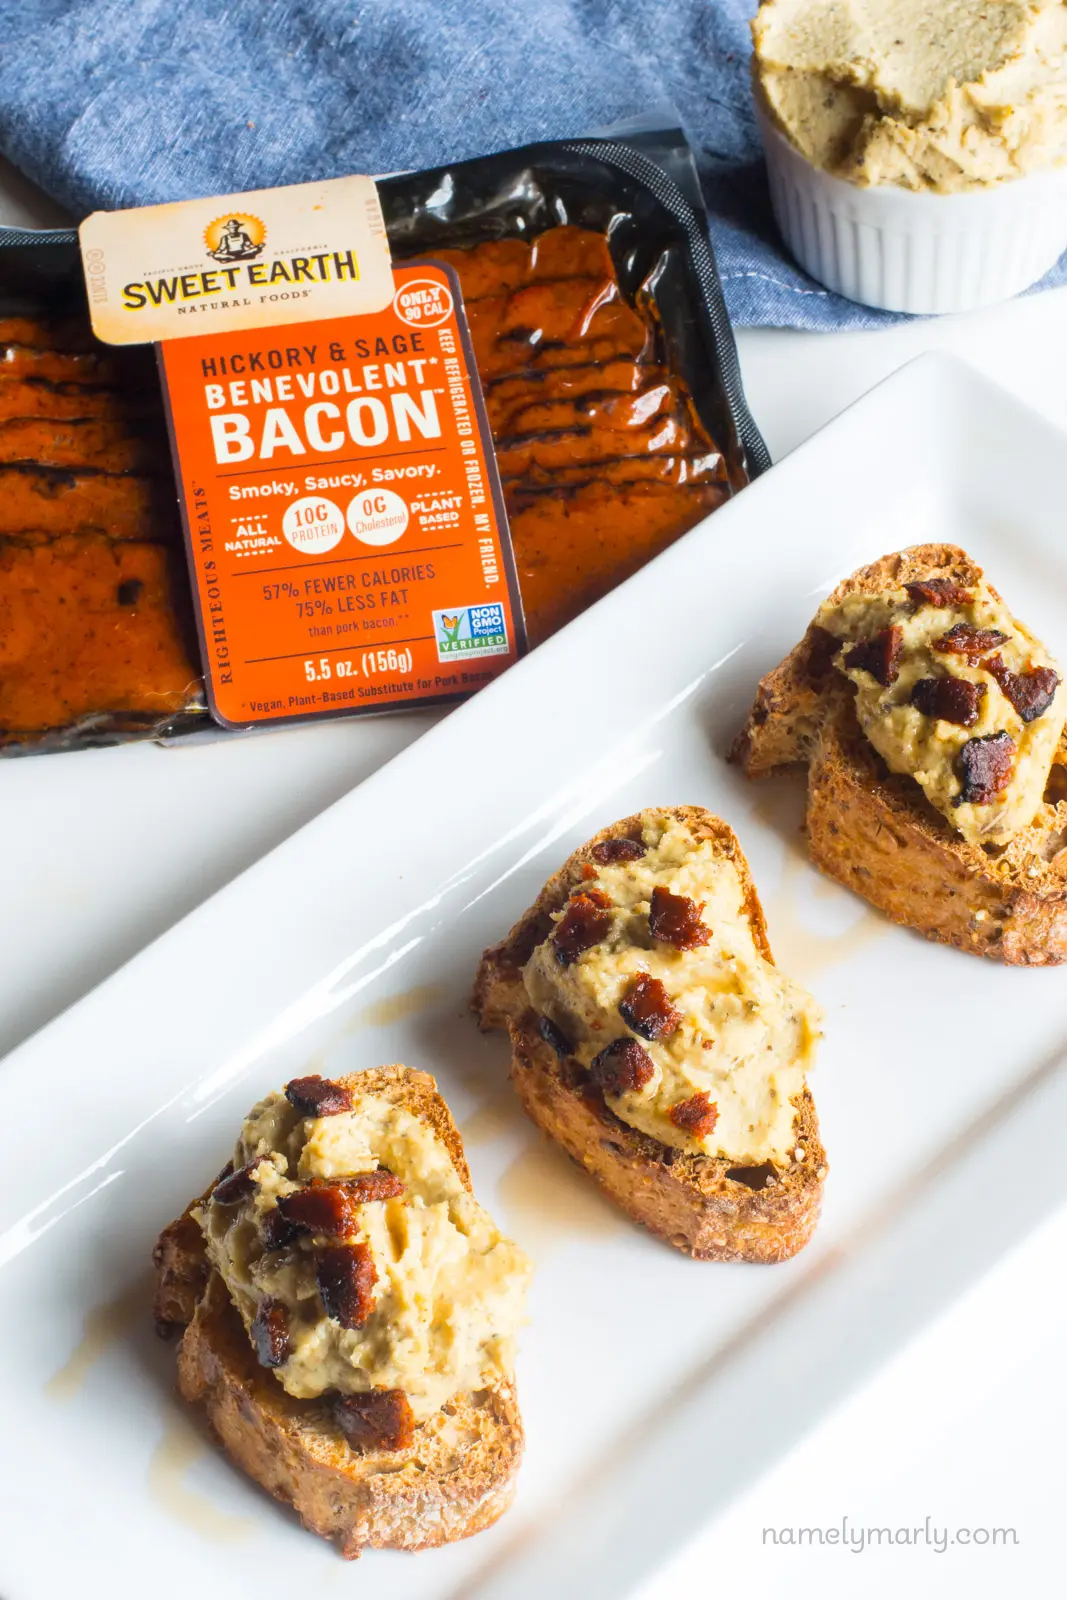 Several slices of vegan crostini are on a plate with a package of vegan bacon behind it.